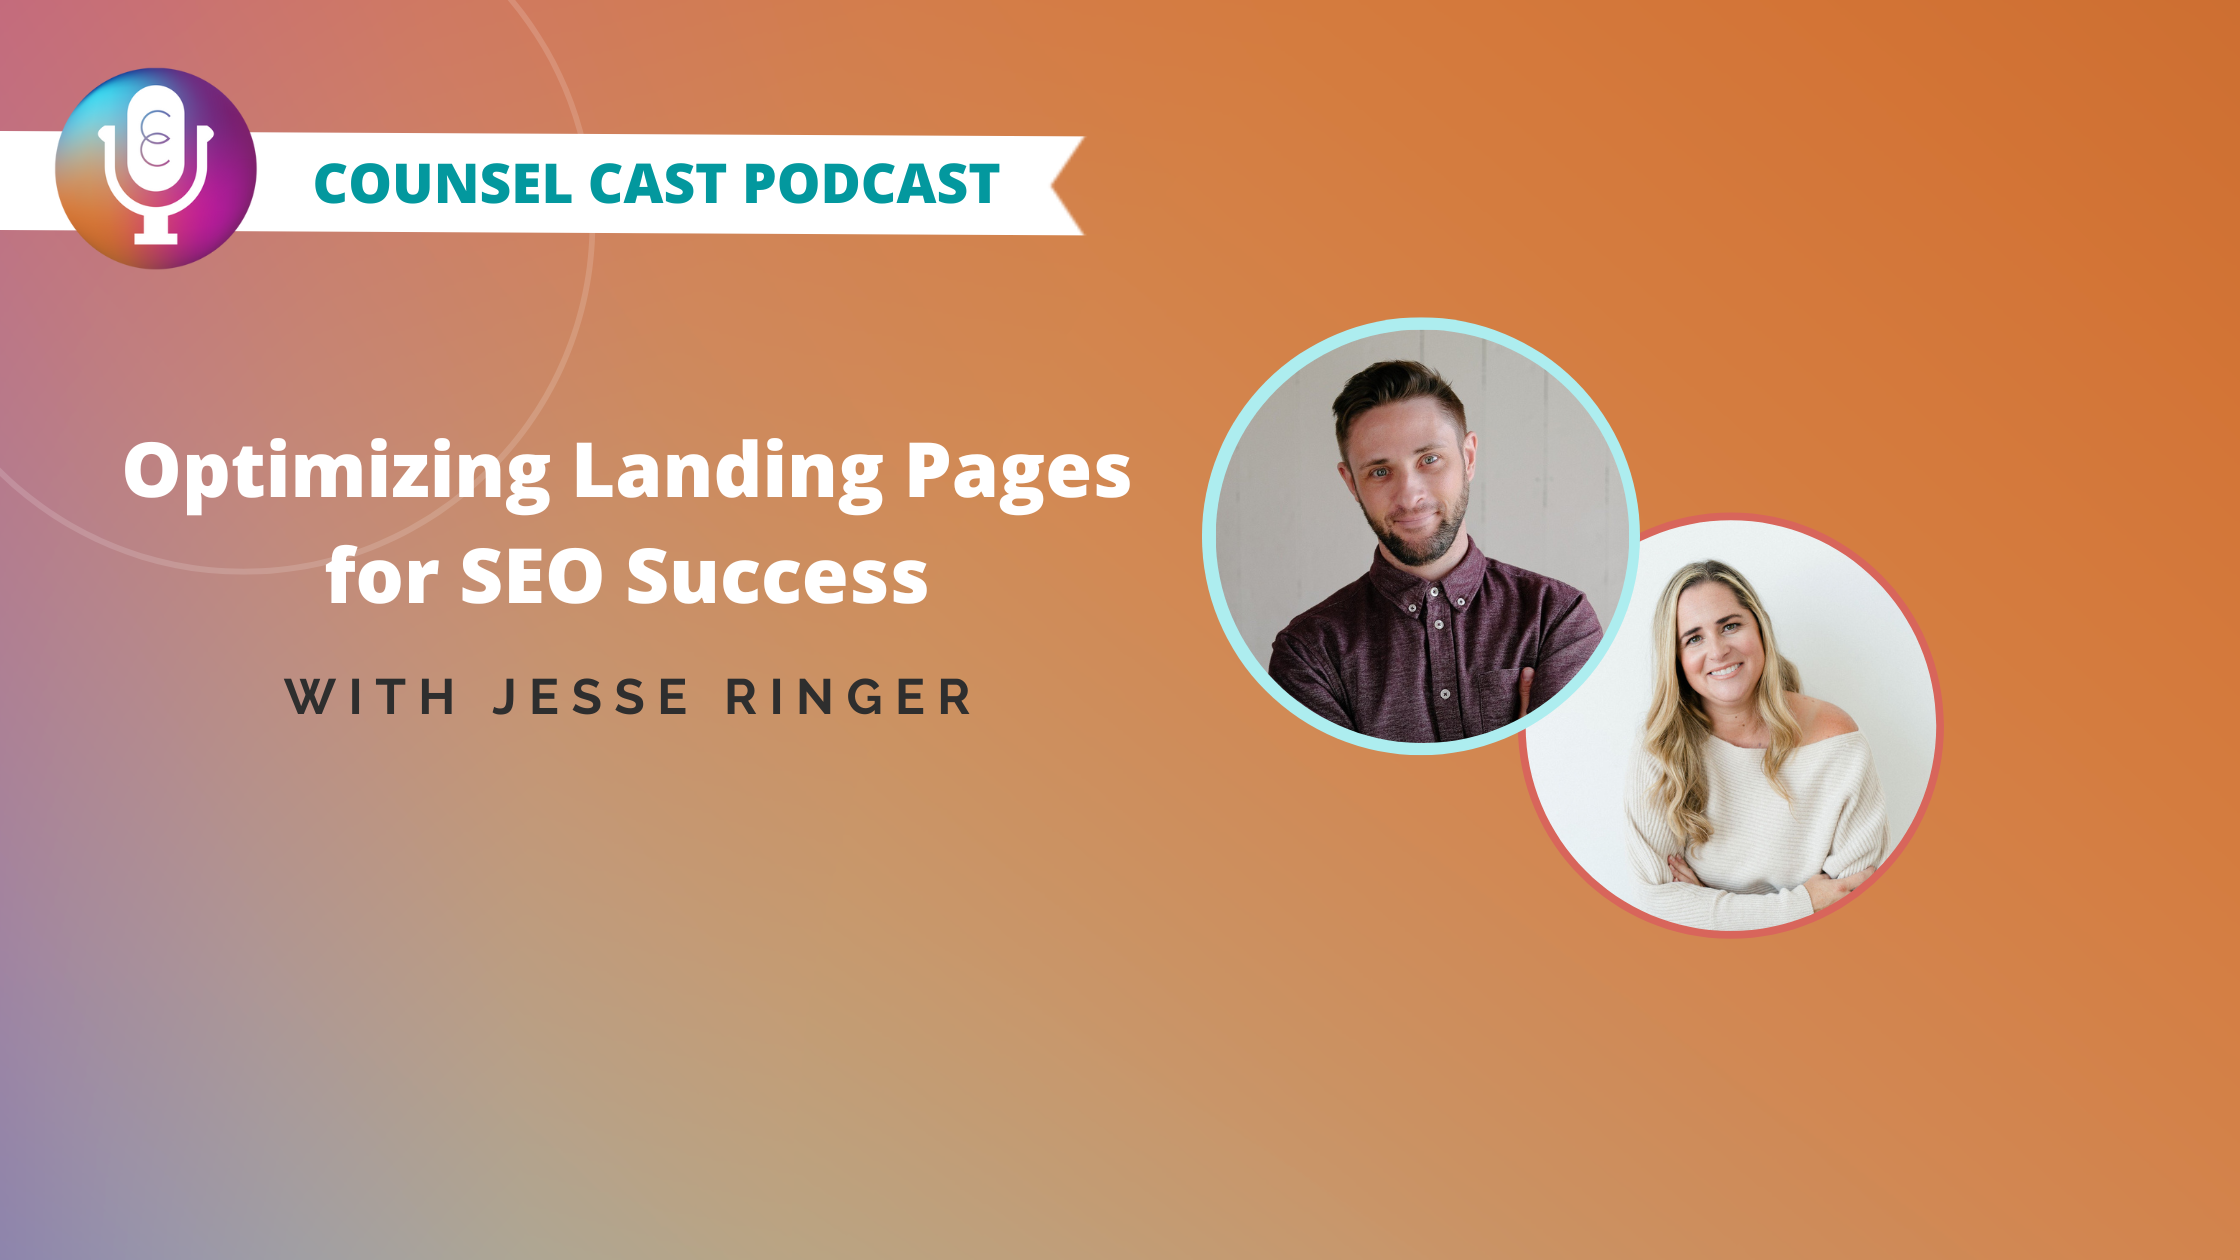 Optimizing Landing Pages for SEO Success with Jesse Ringer